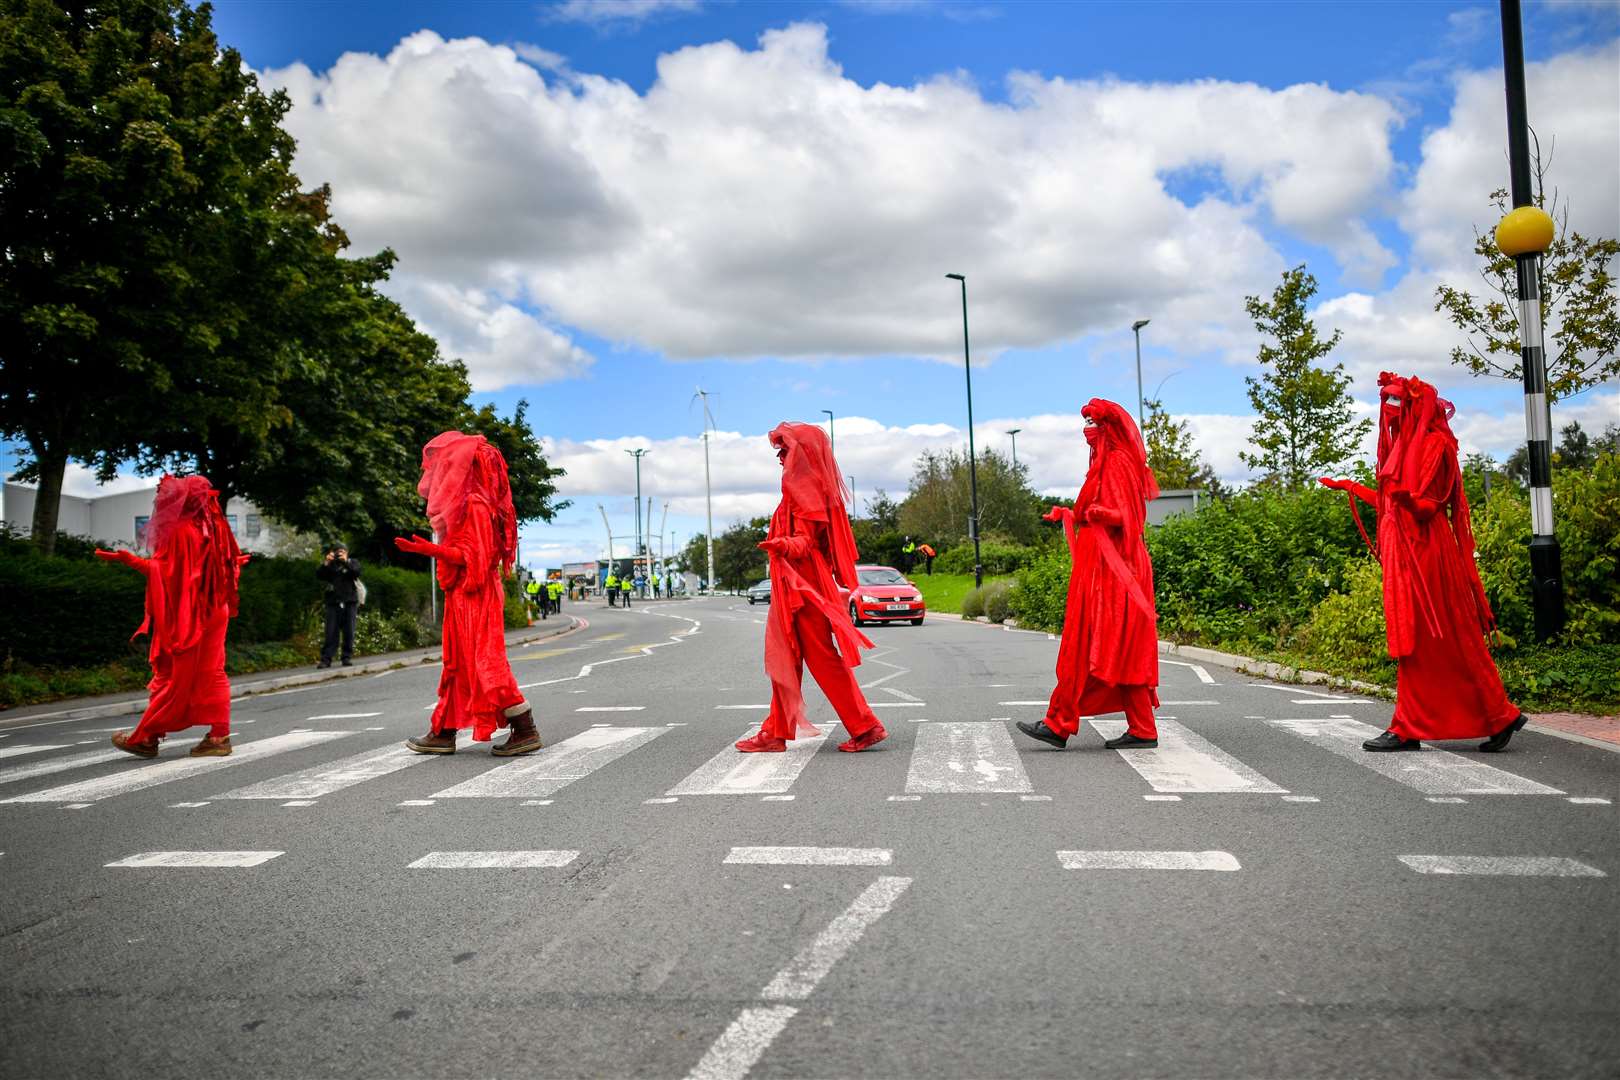 The Red Rebels in their distinctive robes at an Extinction Rebellion protest in Bristol (Ben Birchall/PA)